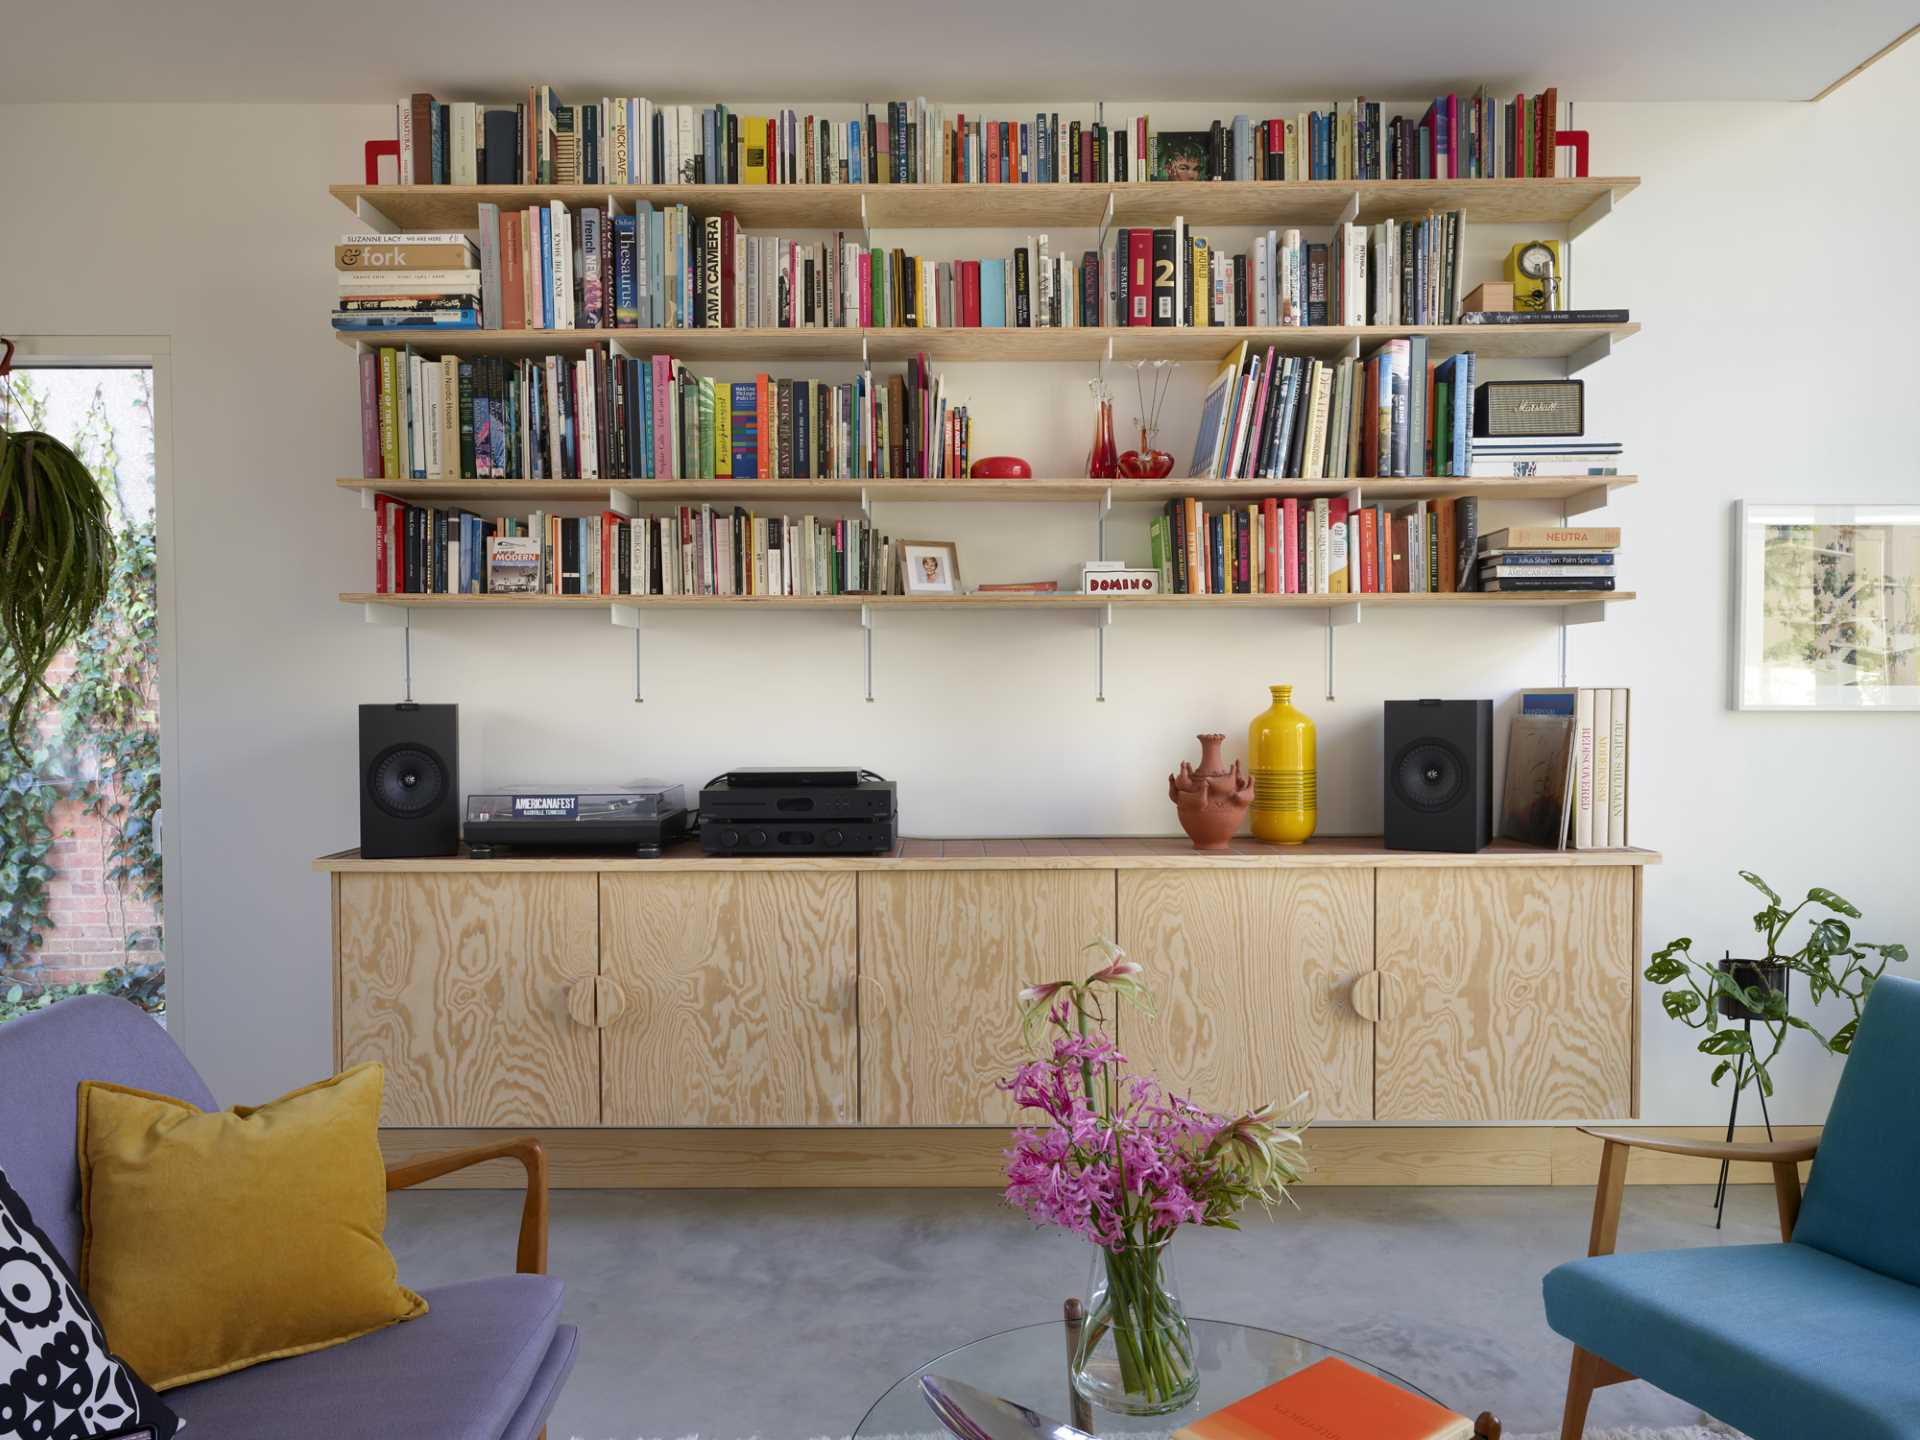 In the living room, a floating wood console provides storage and a place for a record player.